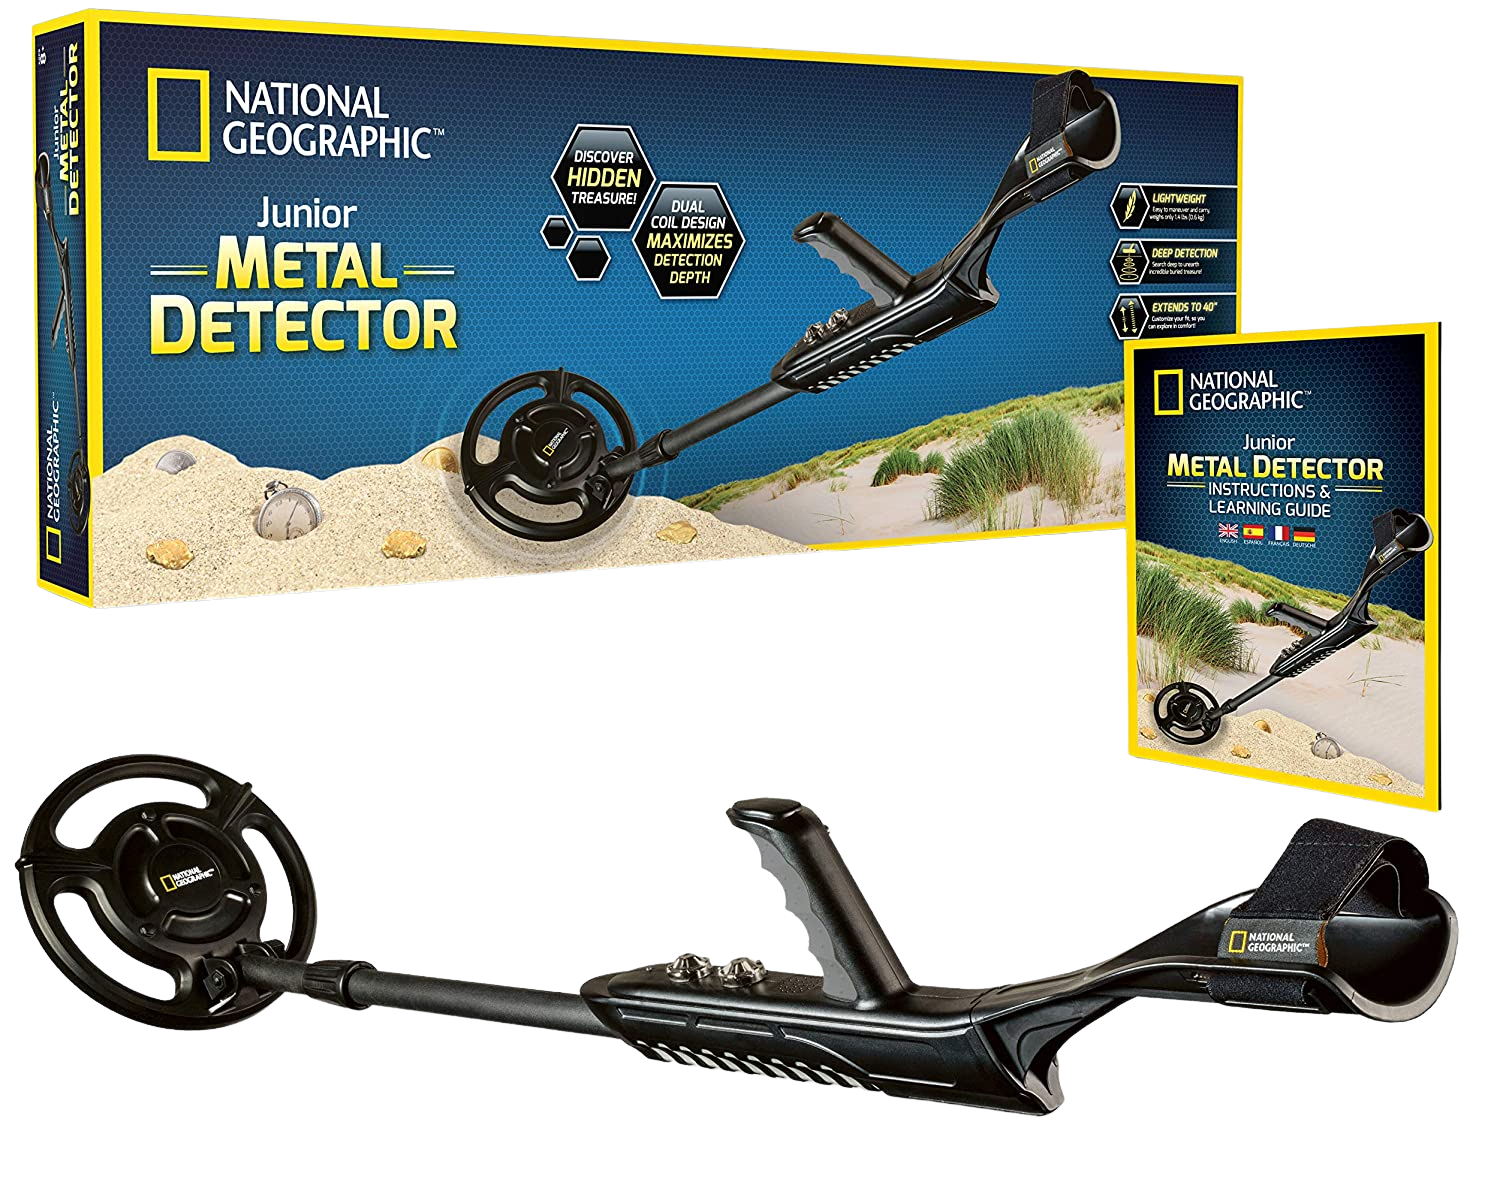 NATIONAL GEOGRAPHIC Junior Metal Detector –Adjustable Metal Detector for Kids with 7.5" Waterproof Dual Coil, Lightweight Design Great for Treasure Hunting Beginners - Home Decor Gifts and More